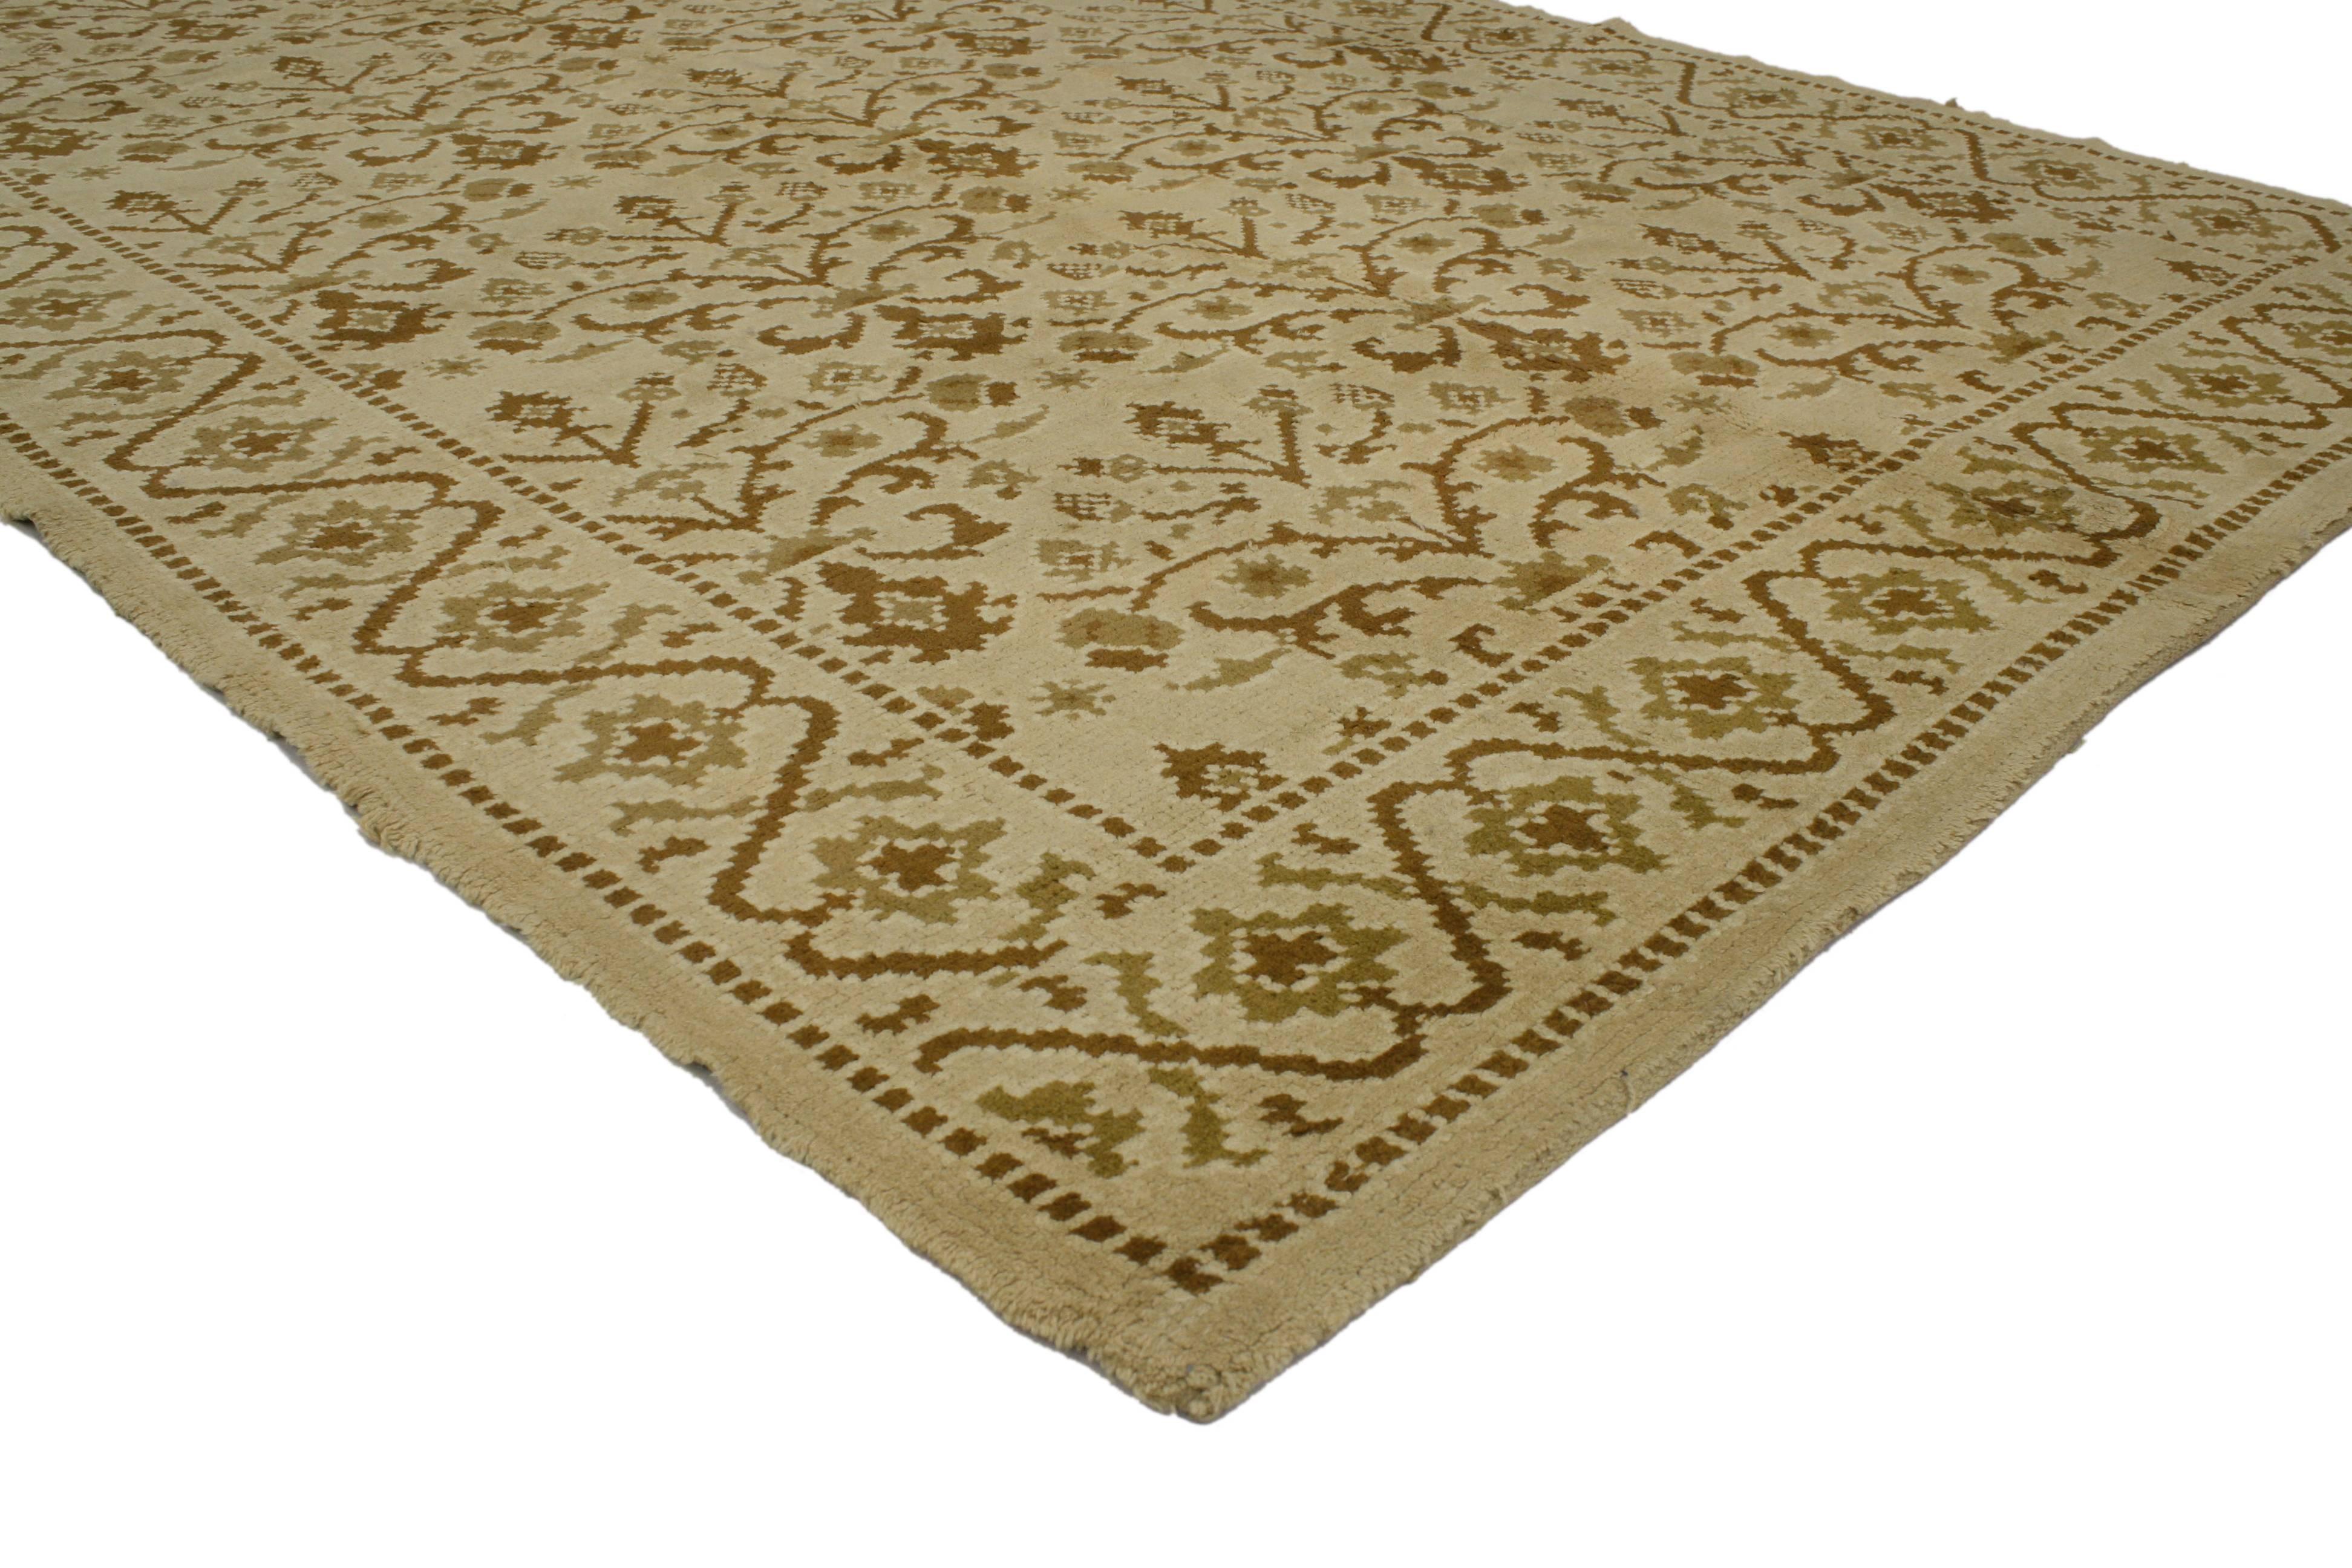 76982 vintage Spanish rug with Transitional style. This vintage European rug represents Spain's history, artistic style and an eccentric melding of the new with the old during the mid-20th century. This vintage Spanish rug with transitional style